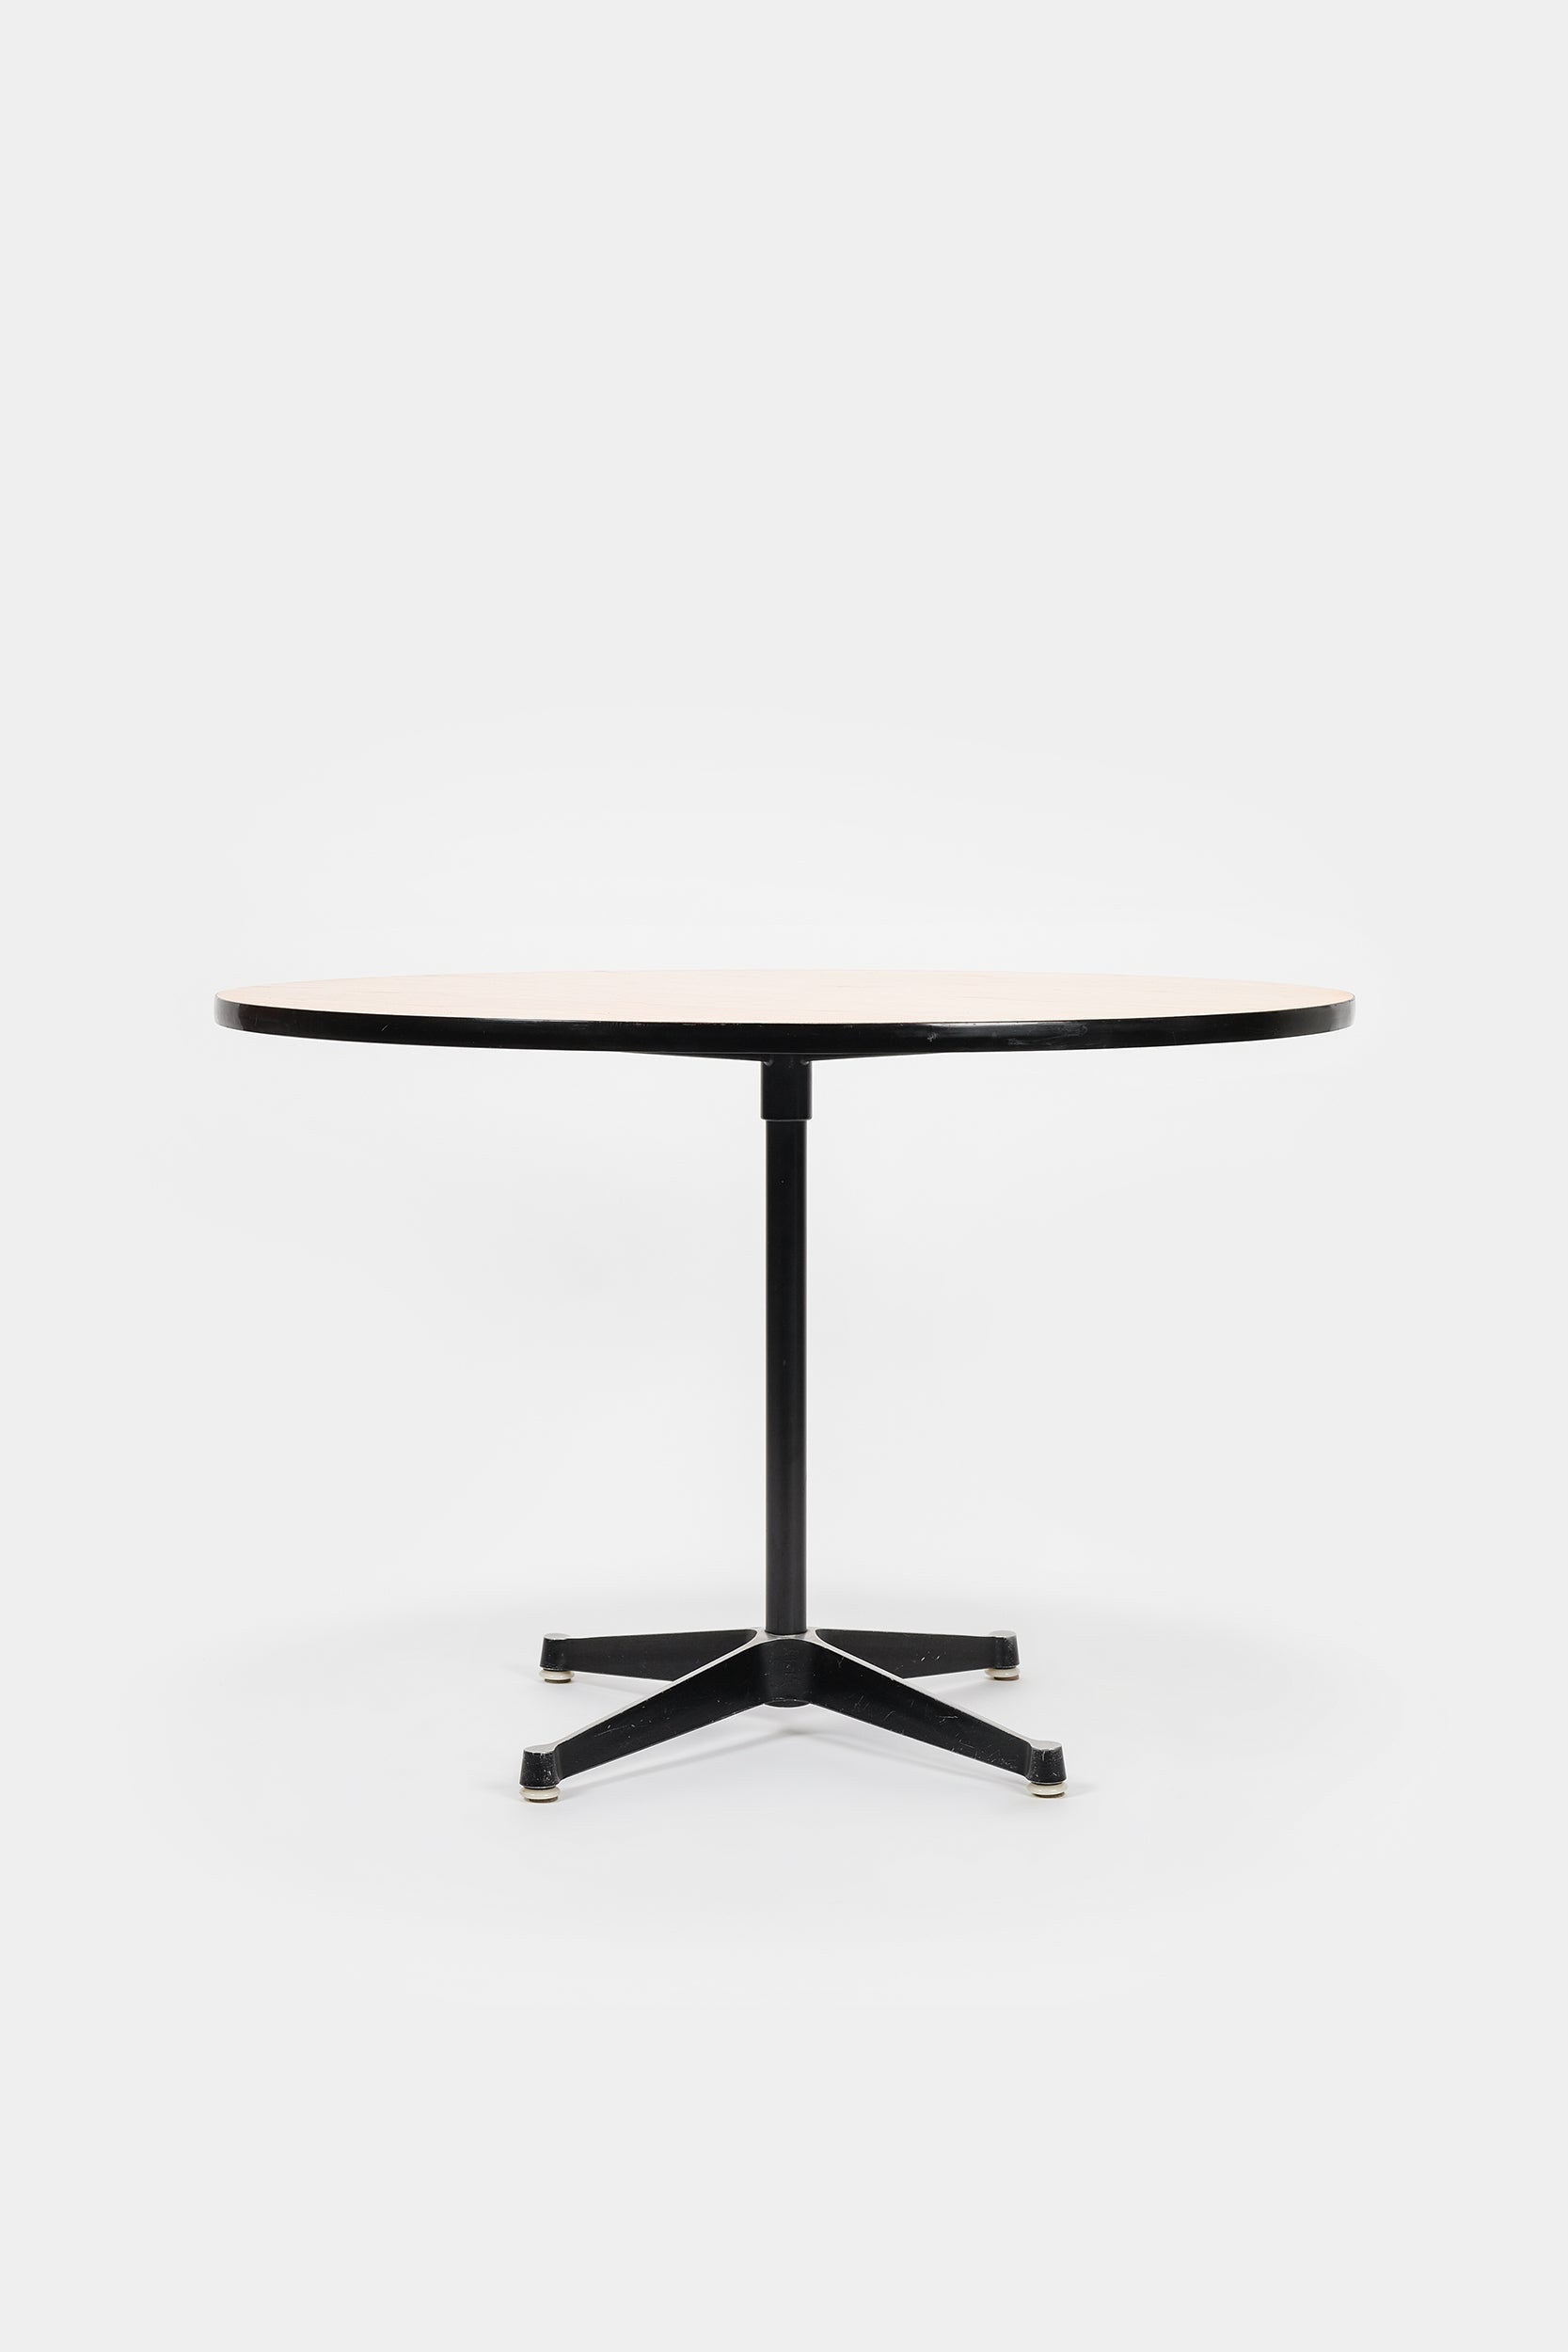 Charles and Ray Eames, Table "Contract", Ash, Vitra, 70s